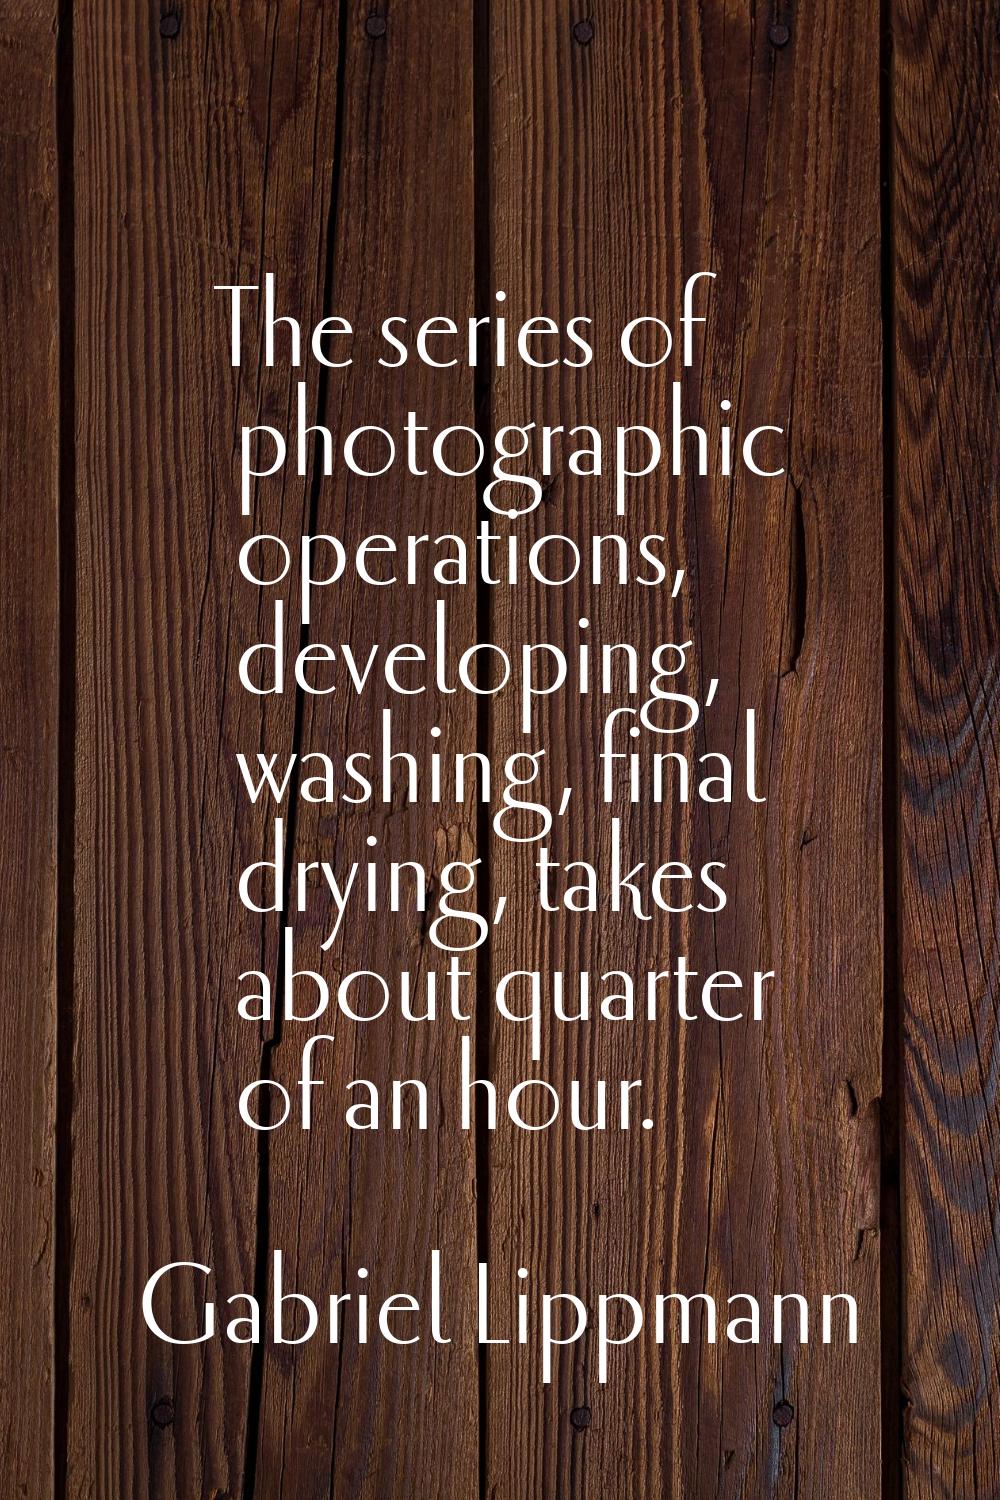 The series of photographic operations, developing, washing, final drying, takes about quarter of an